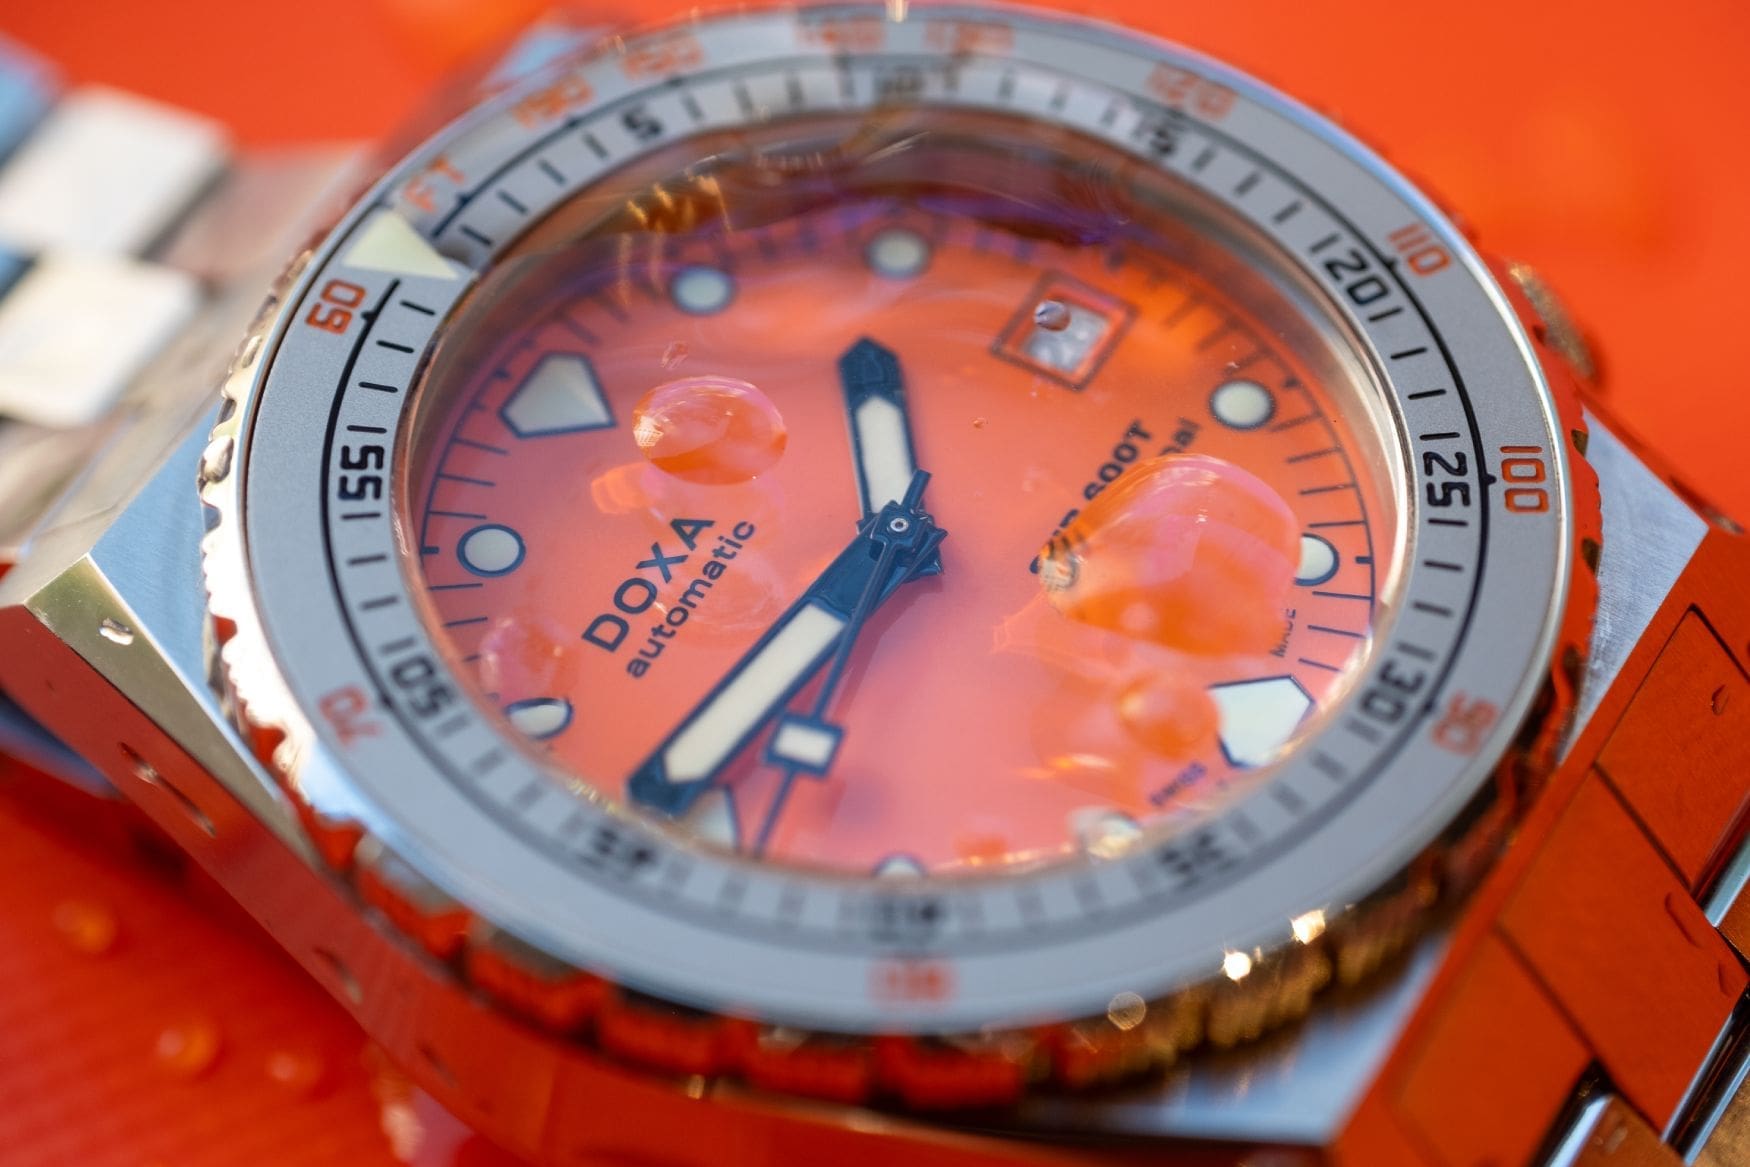 doxa sub 600t professional feature water